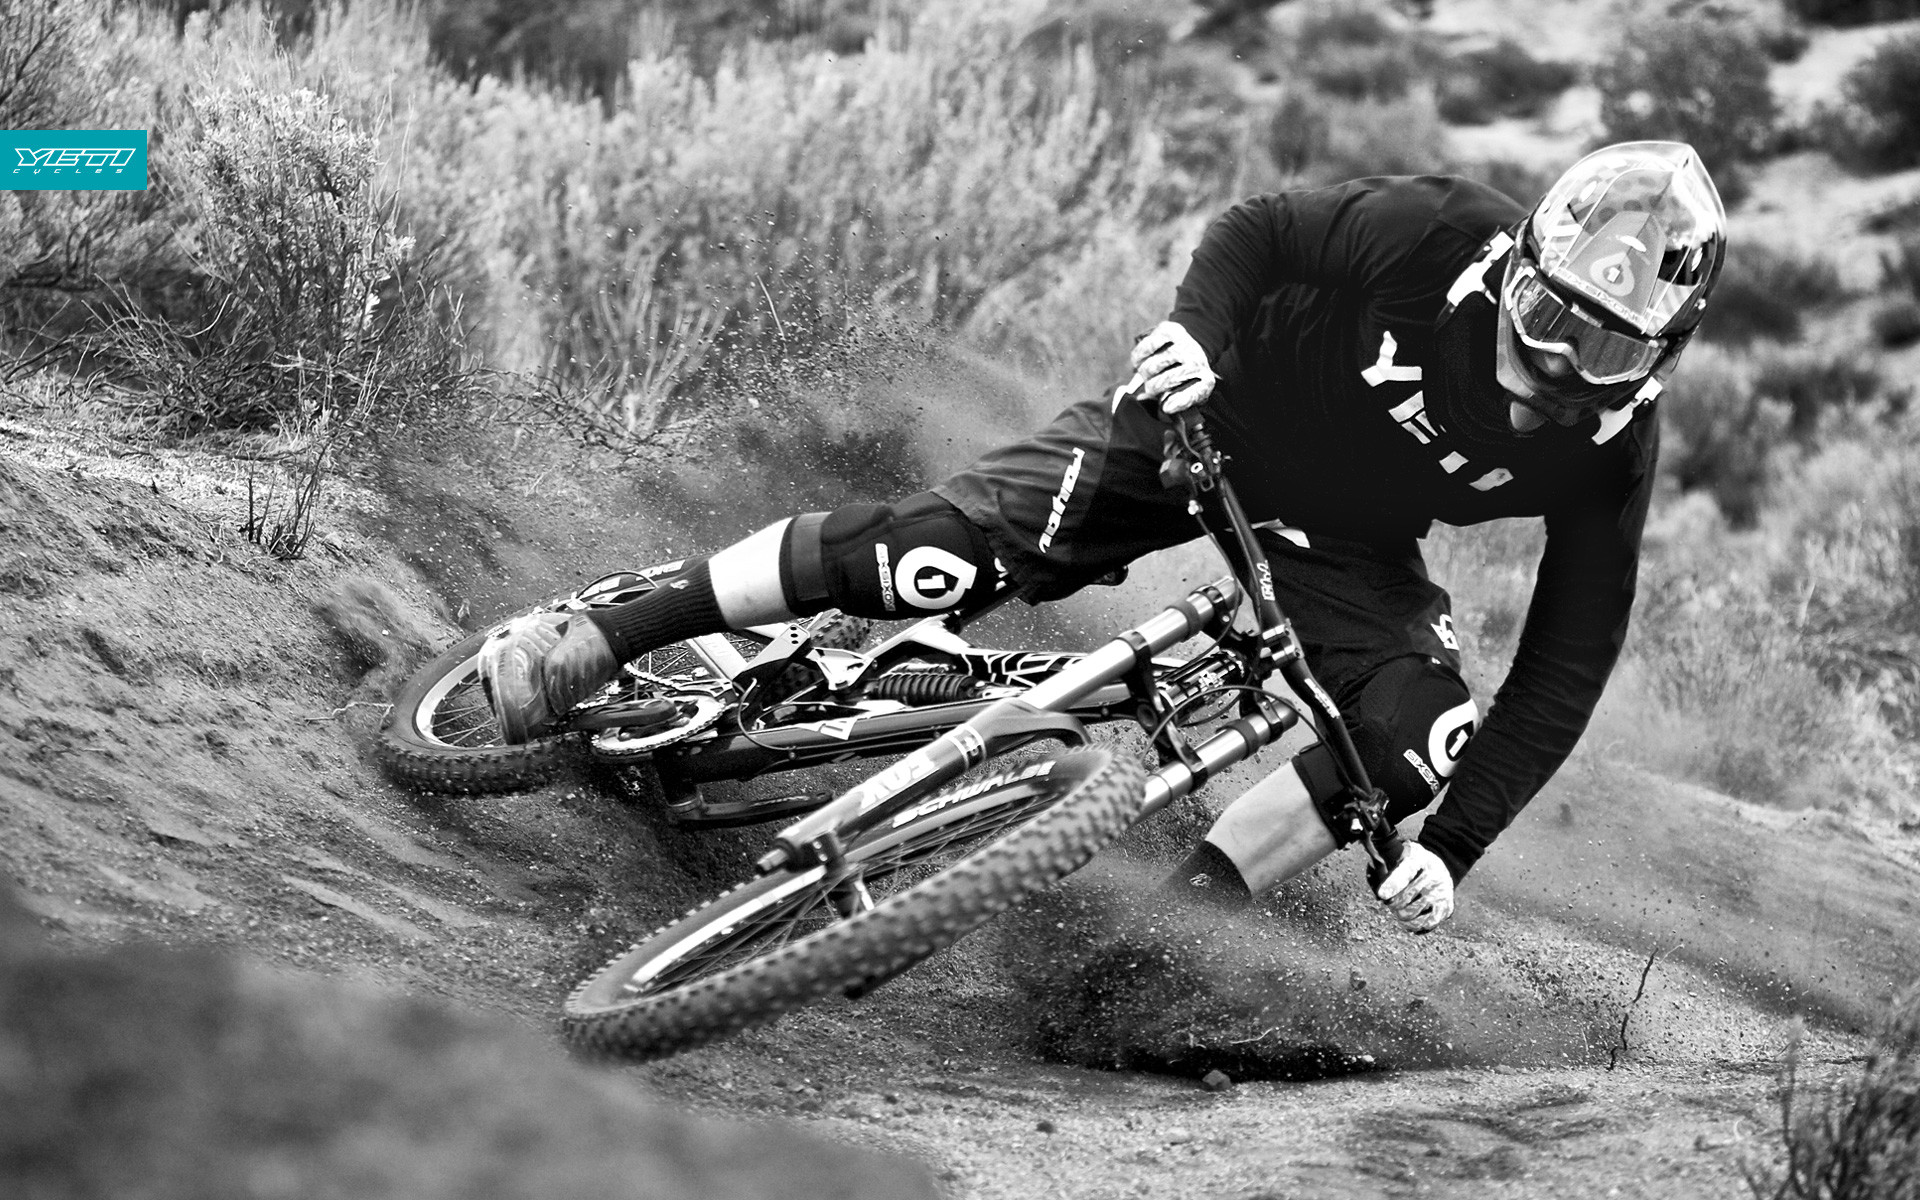 1920x1200 Downhill wallpaper Android Apps on Google Play 1400Ã900 Downhill Wallpaper  (38 Wallpapers) Â· Downhill Mountain BikeWallpapers ...